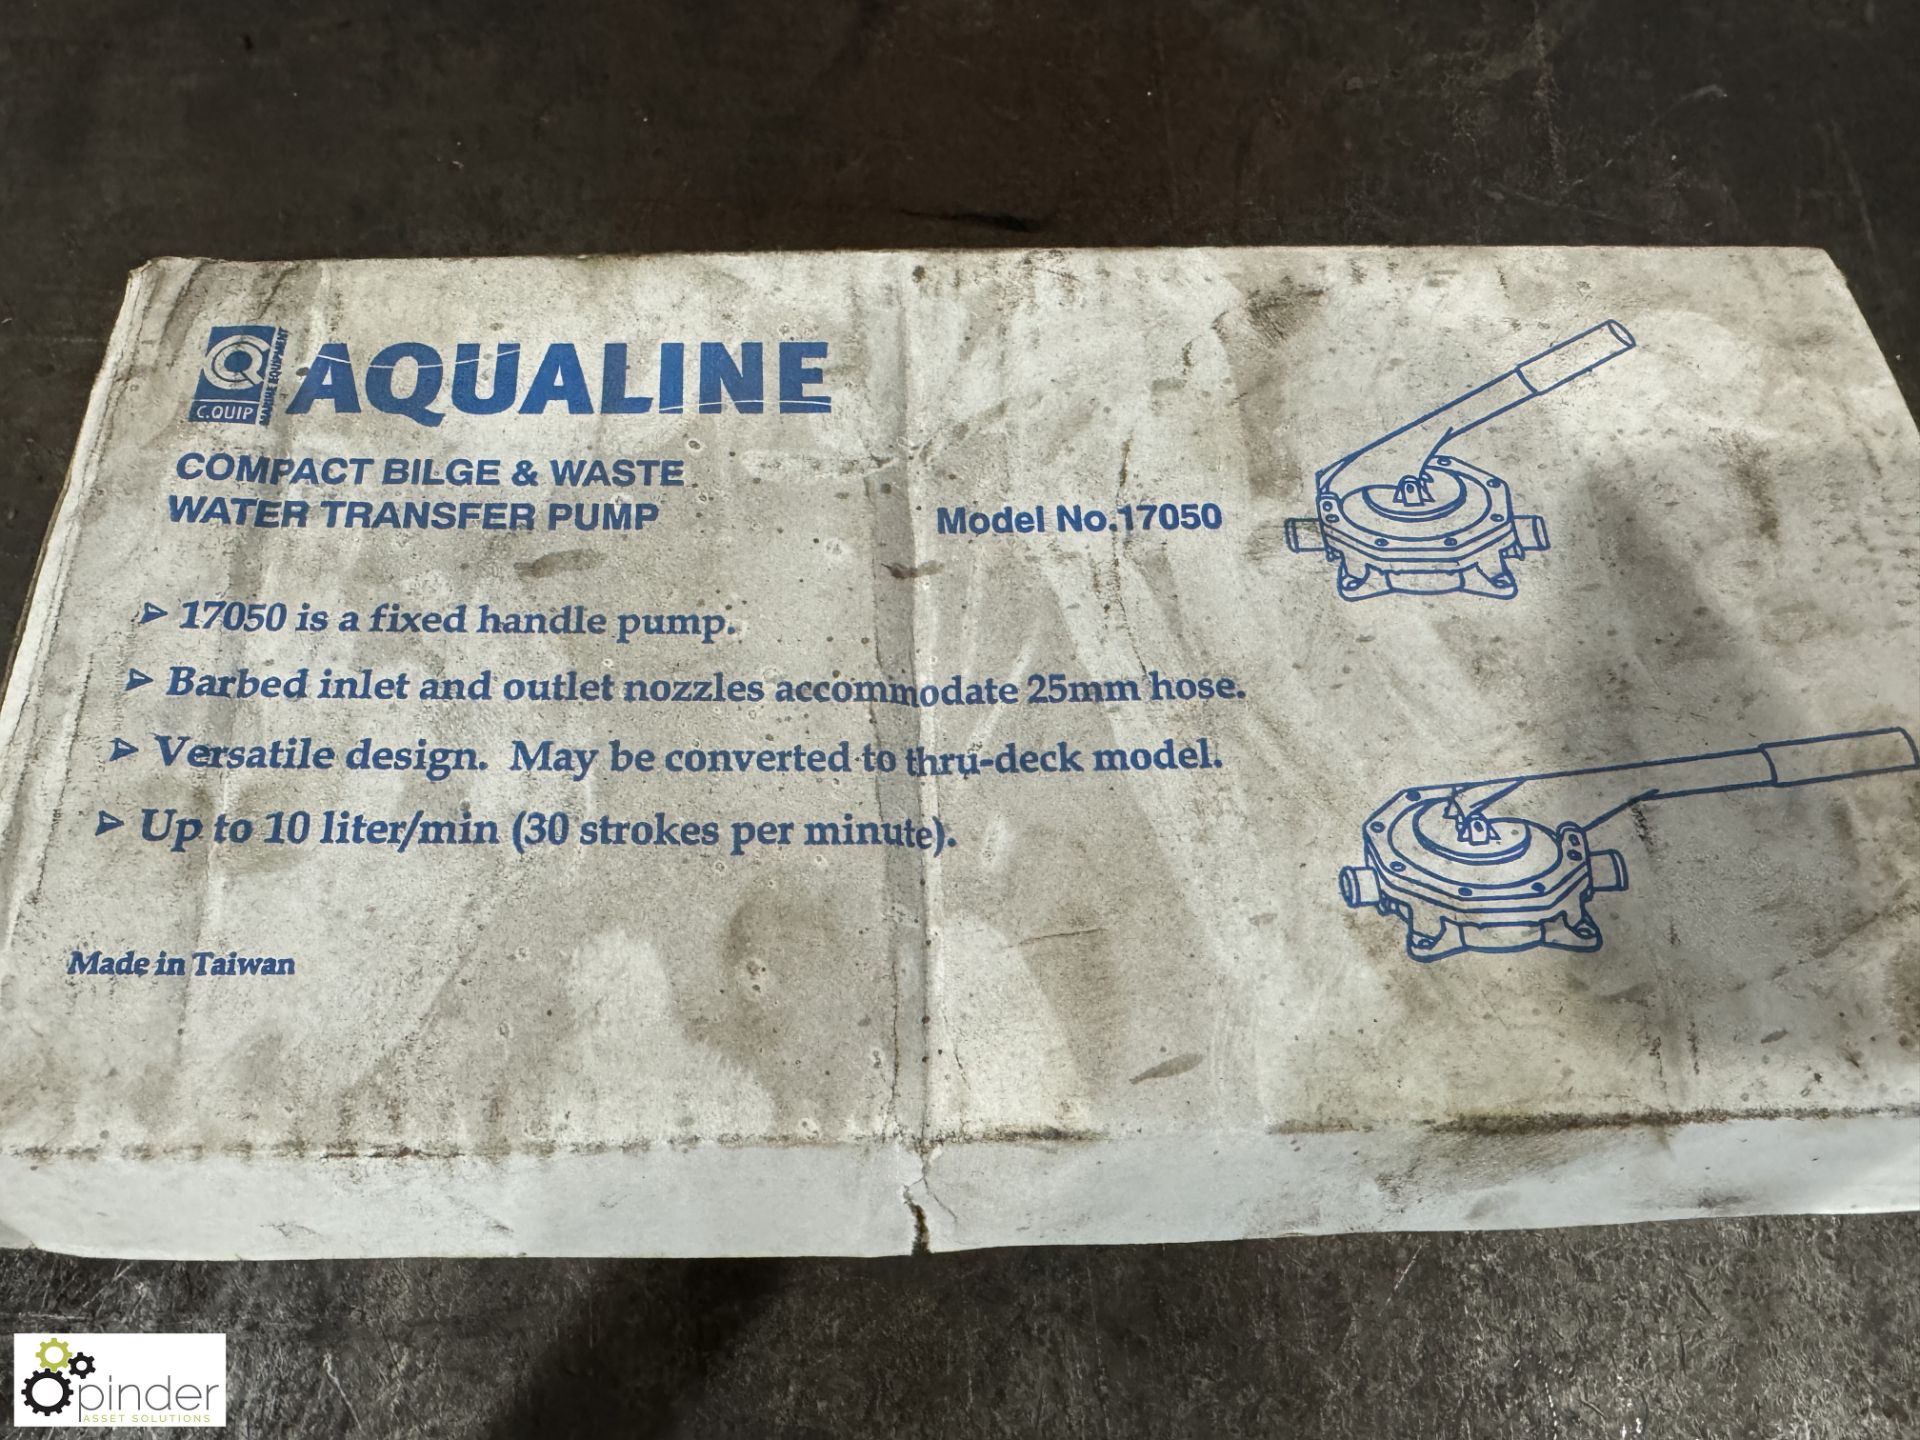 Aqualine Compact Bulge and Waste Water Transfer Pump, boxed and unused - Image 3 of 4